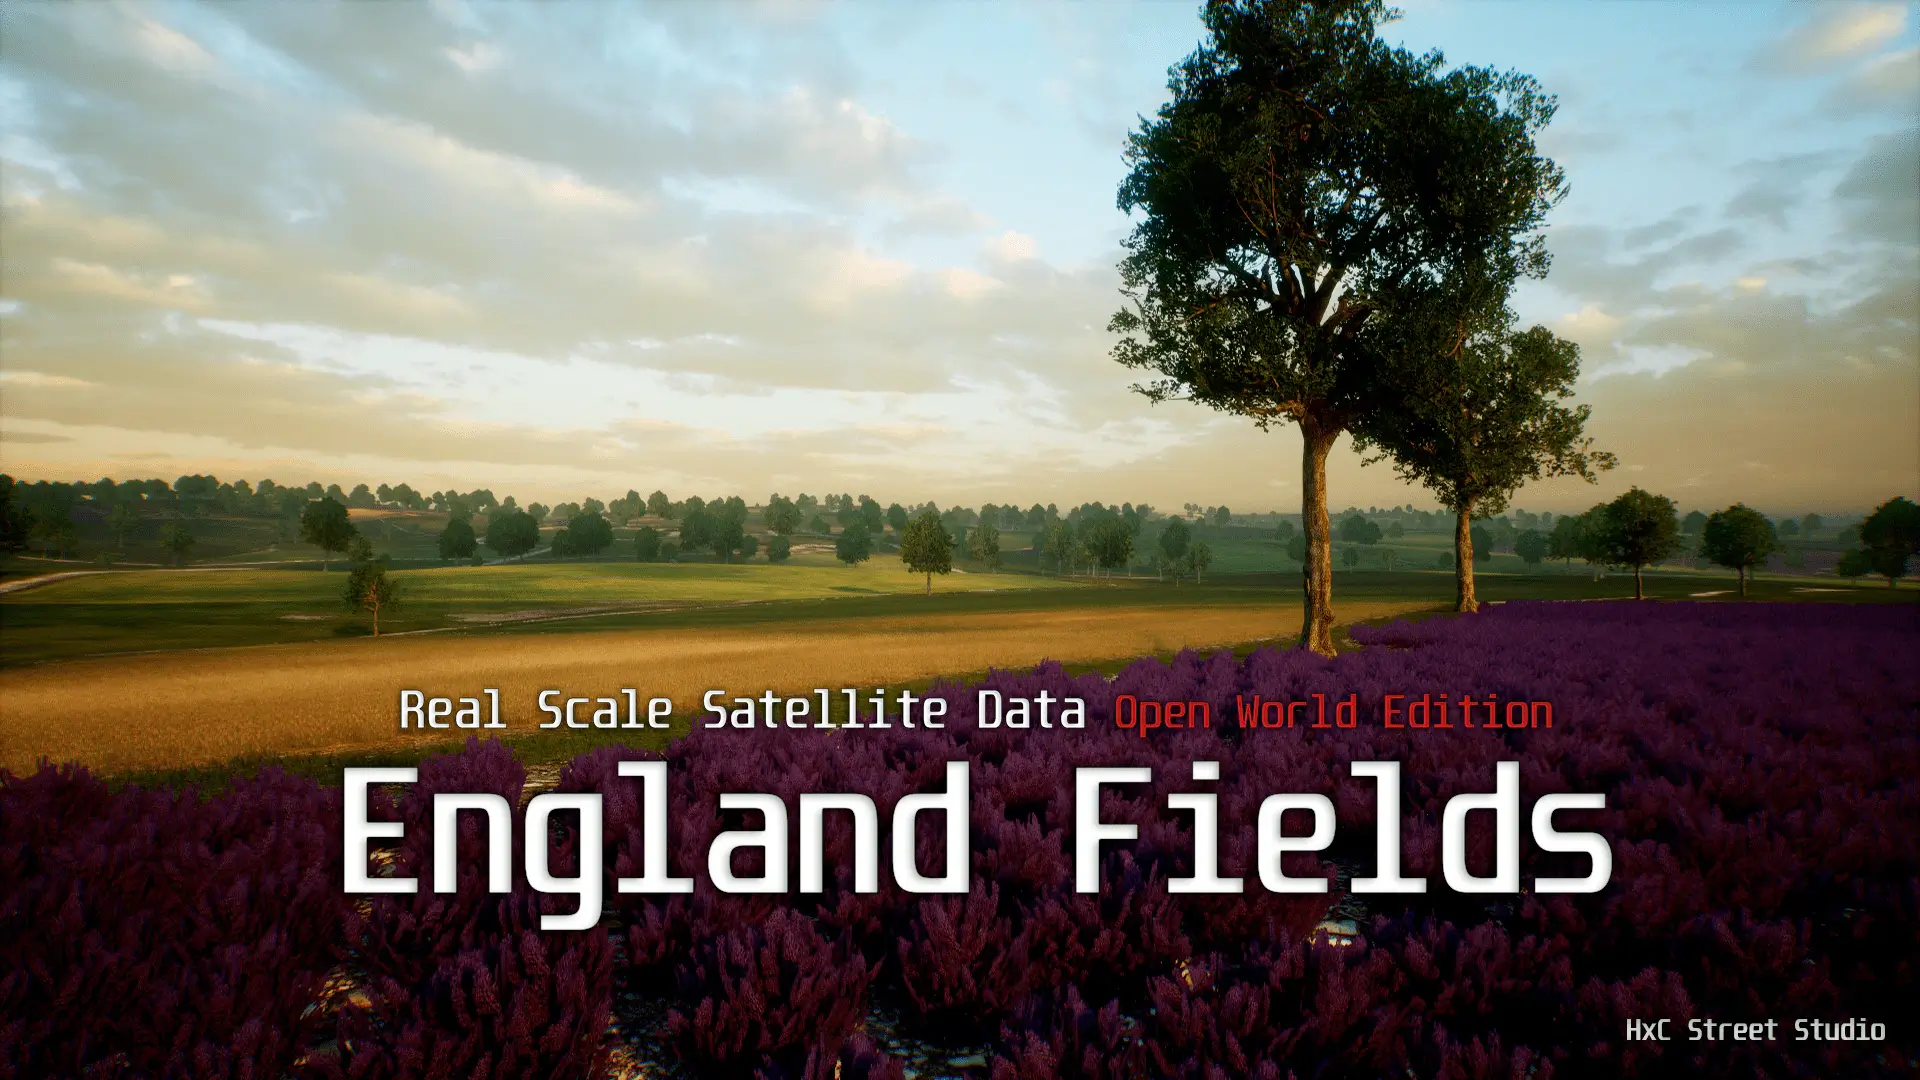 【UE4/5】英格兰田野 – Landscape England Fields – Real Scale Satellite Data